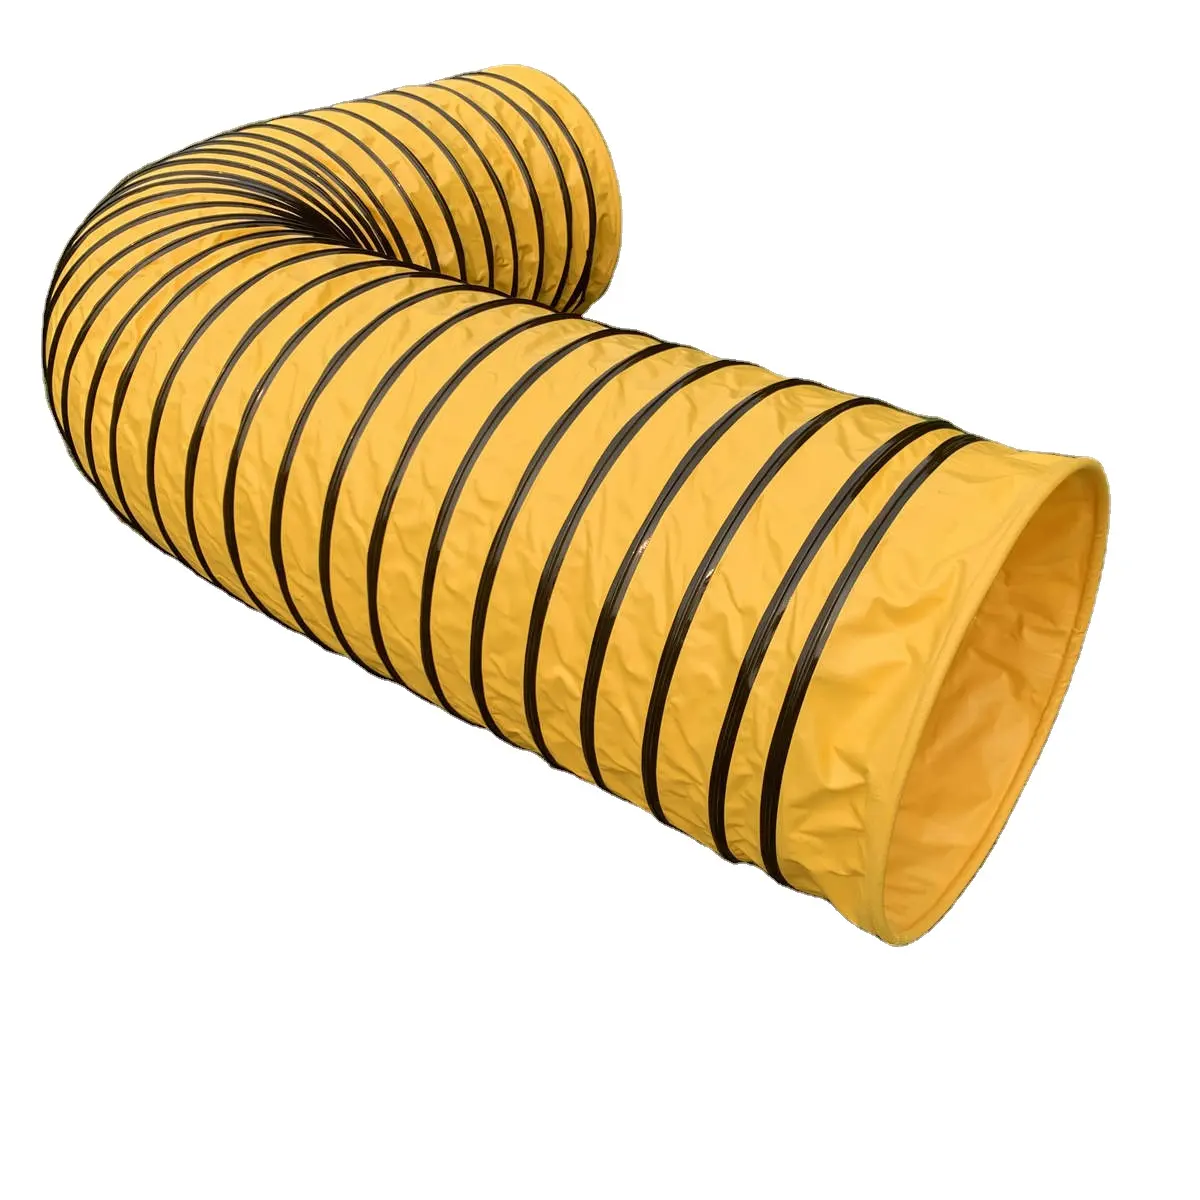 20 inch diameter durable PVC exhaust insulated flexible air ventilation spiral duct for dehumidification